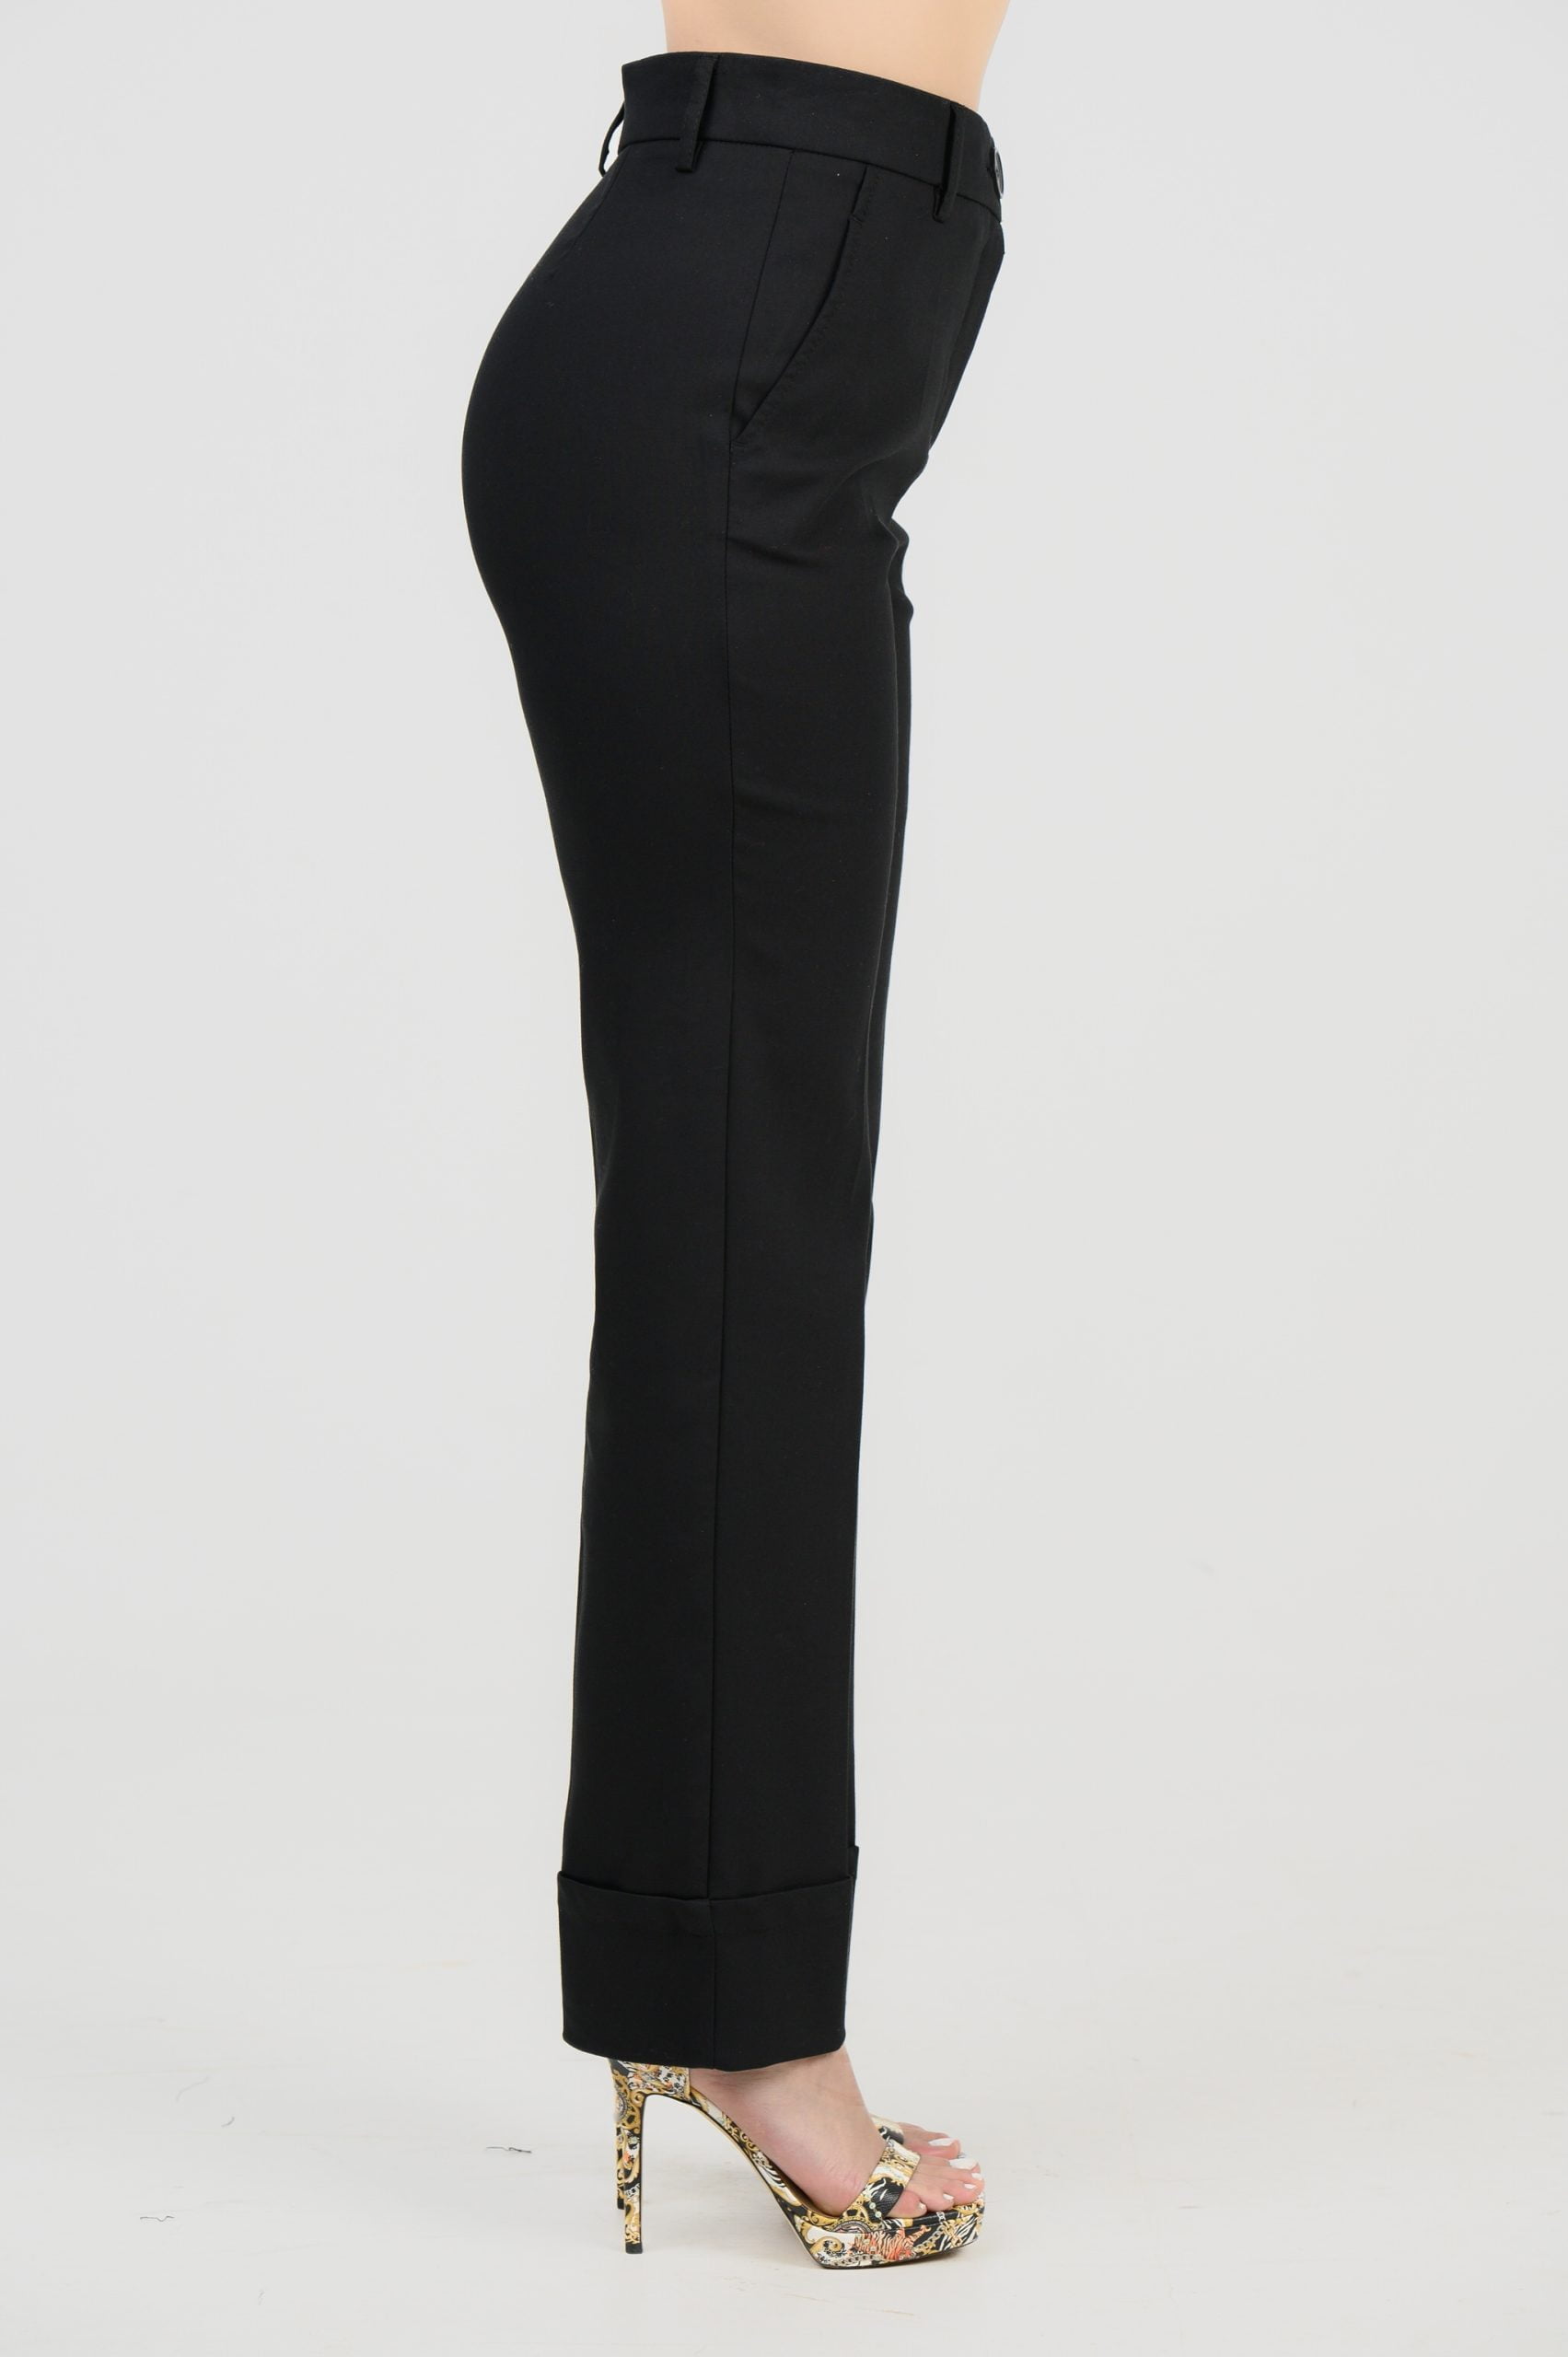 Black trousers in straight line, from the side.